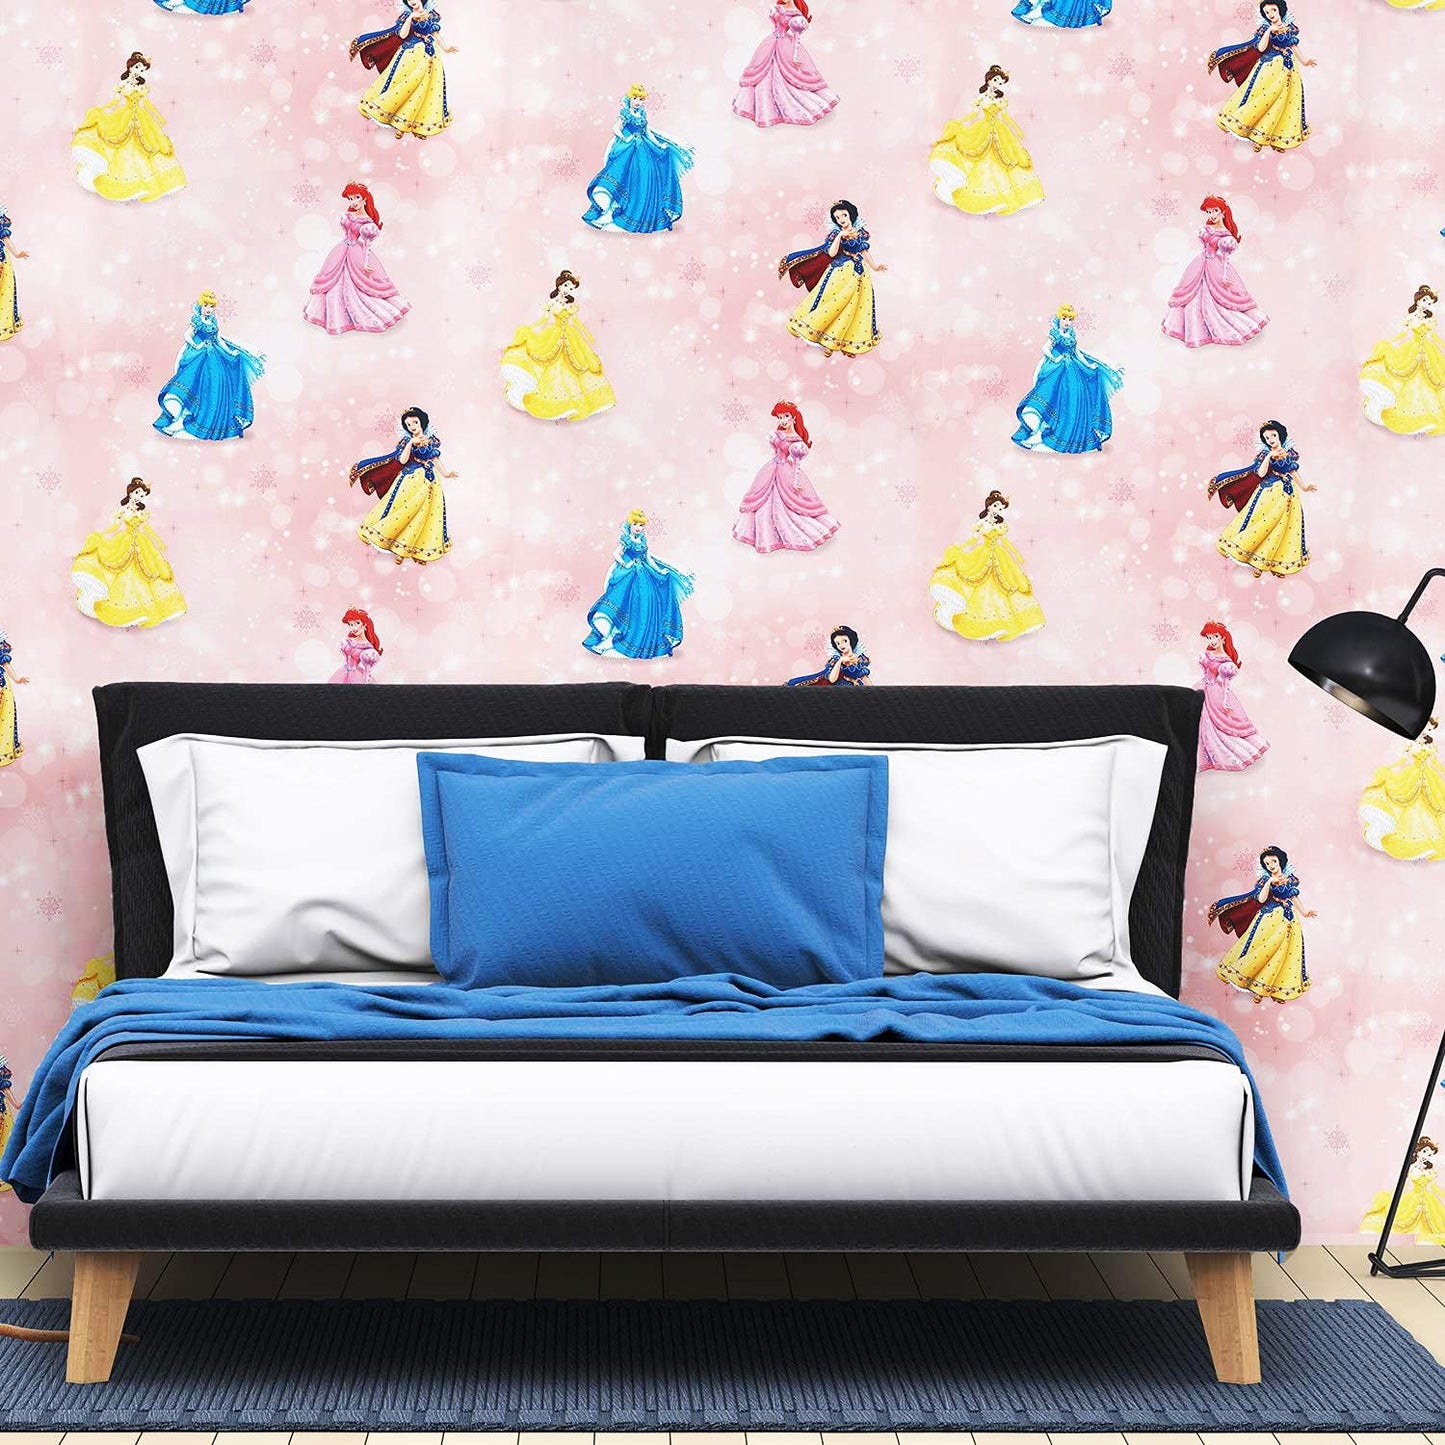 3D Latest Barbie Design Light Pink Wallpaper Roll for Home Walls 57 Sq Ft (0.53m or 21 Inches x 10m or 33 Feet)